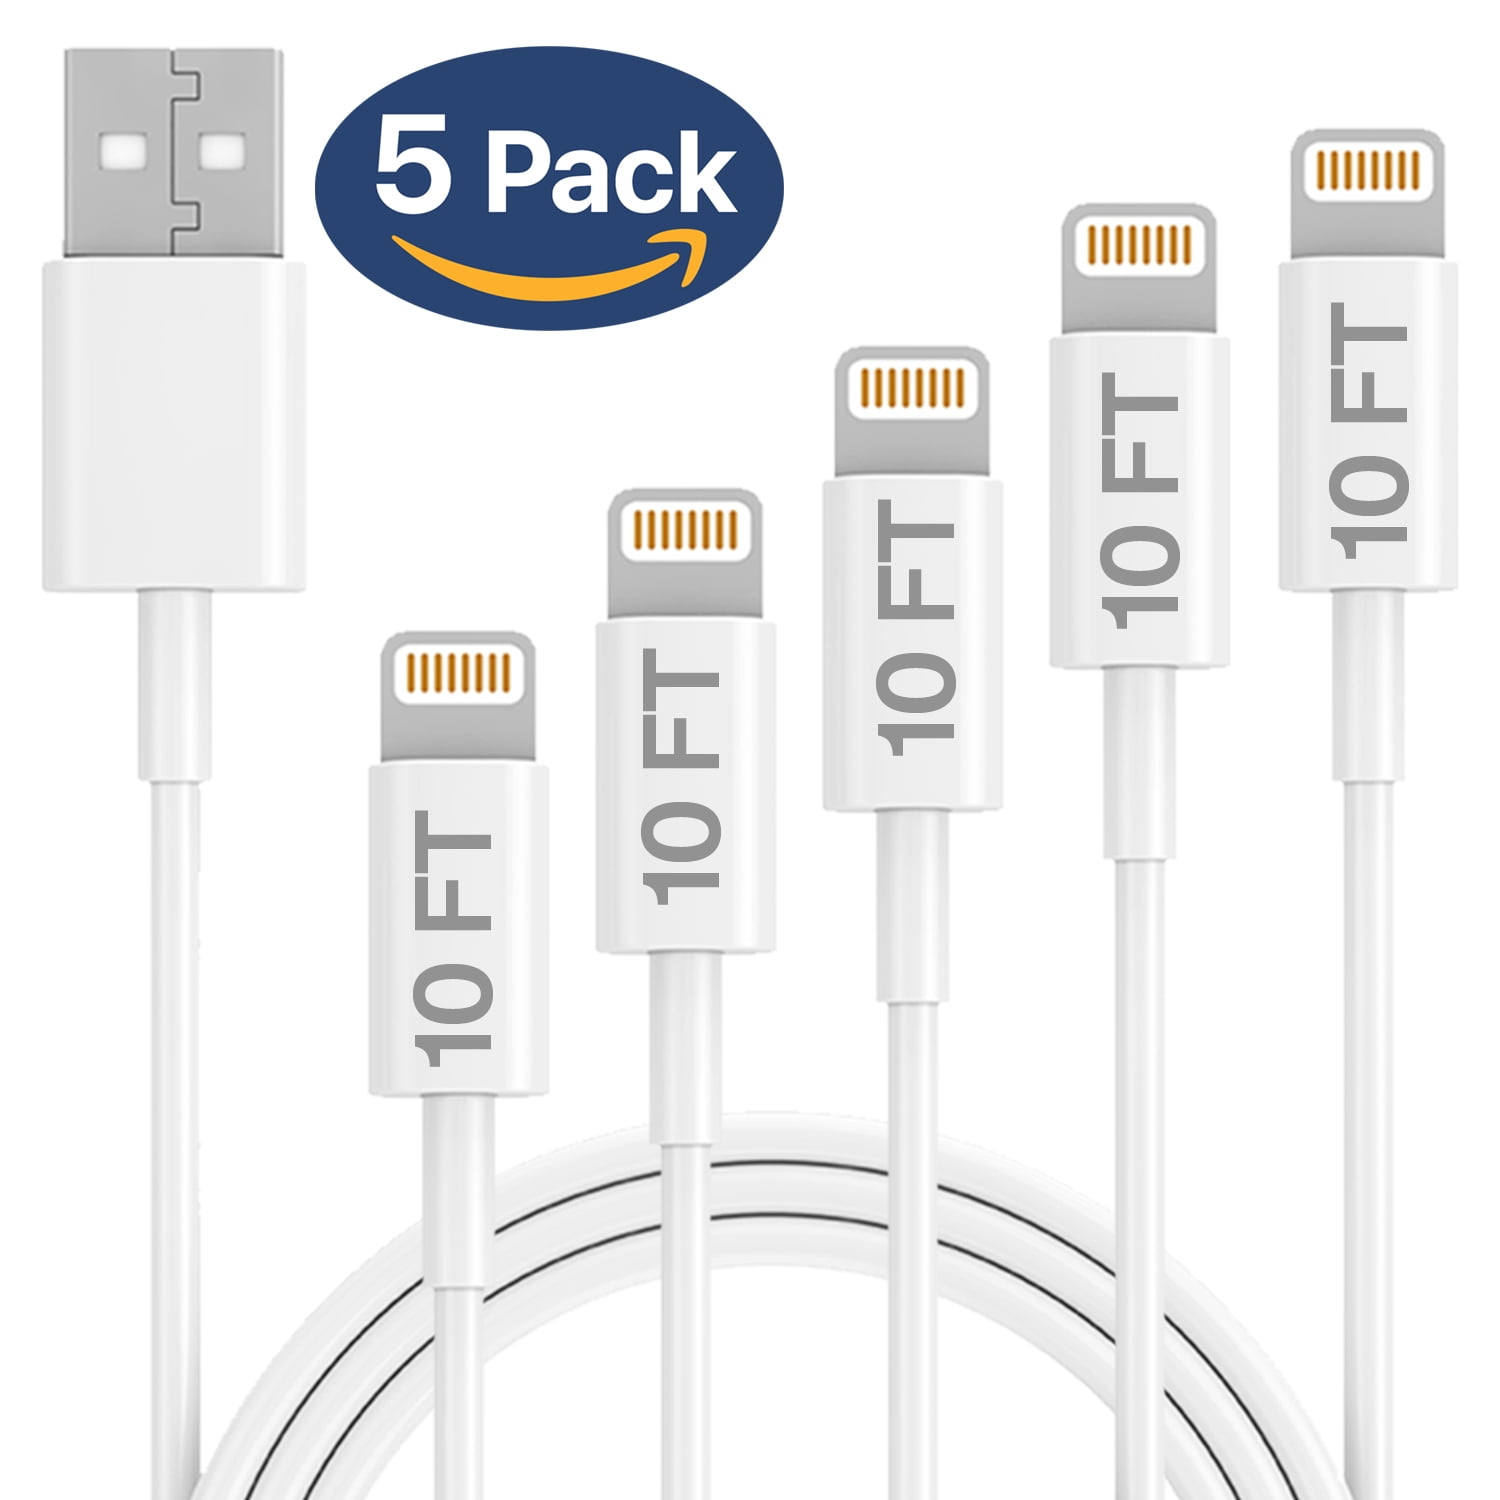 4 Pack 6FT Extra Long Nylon Braided USB Charging & Syncing Cord Compatible iPhone Xs/Xs Max/XR/X/8/8 Plus/7/7 Plus/6S/6S Plus/SE/iPad/iPod V151 iPhone Charger,MFi Certified Lightning Cable 